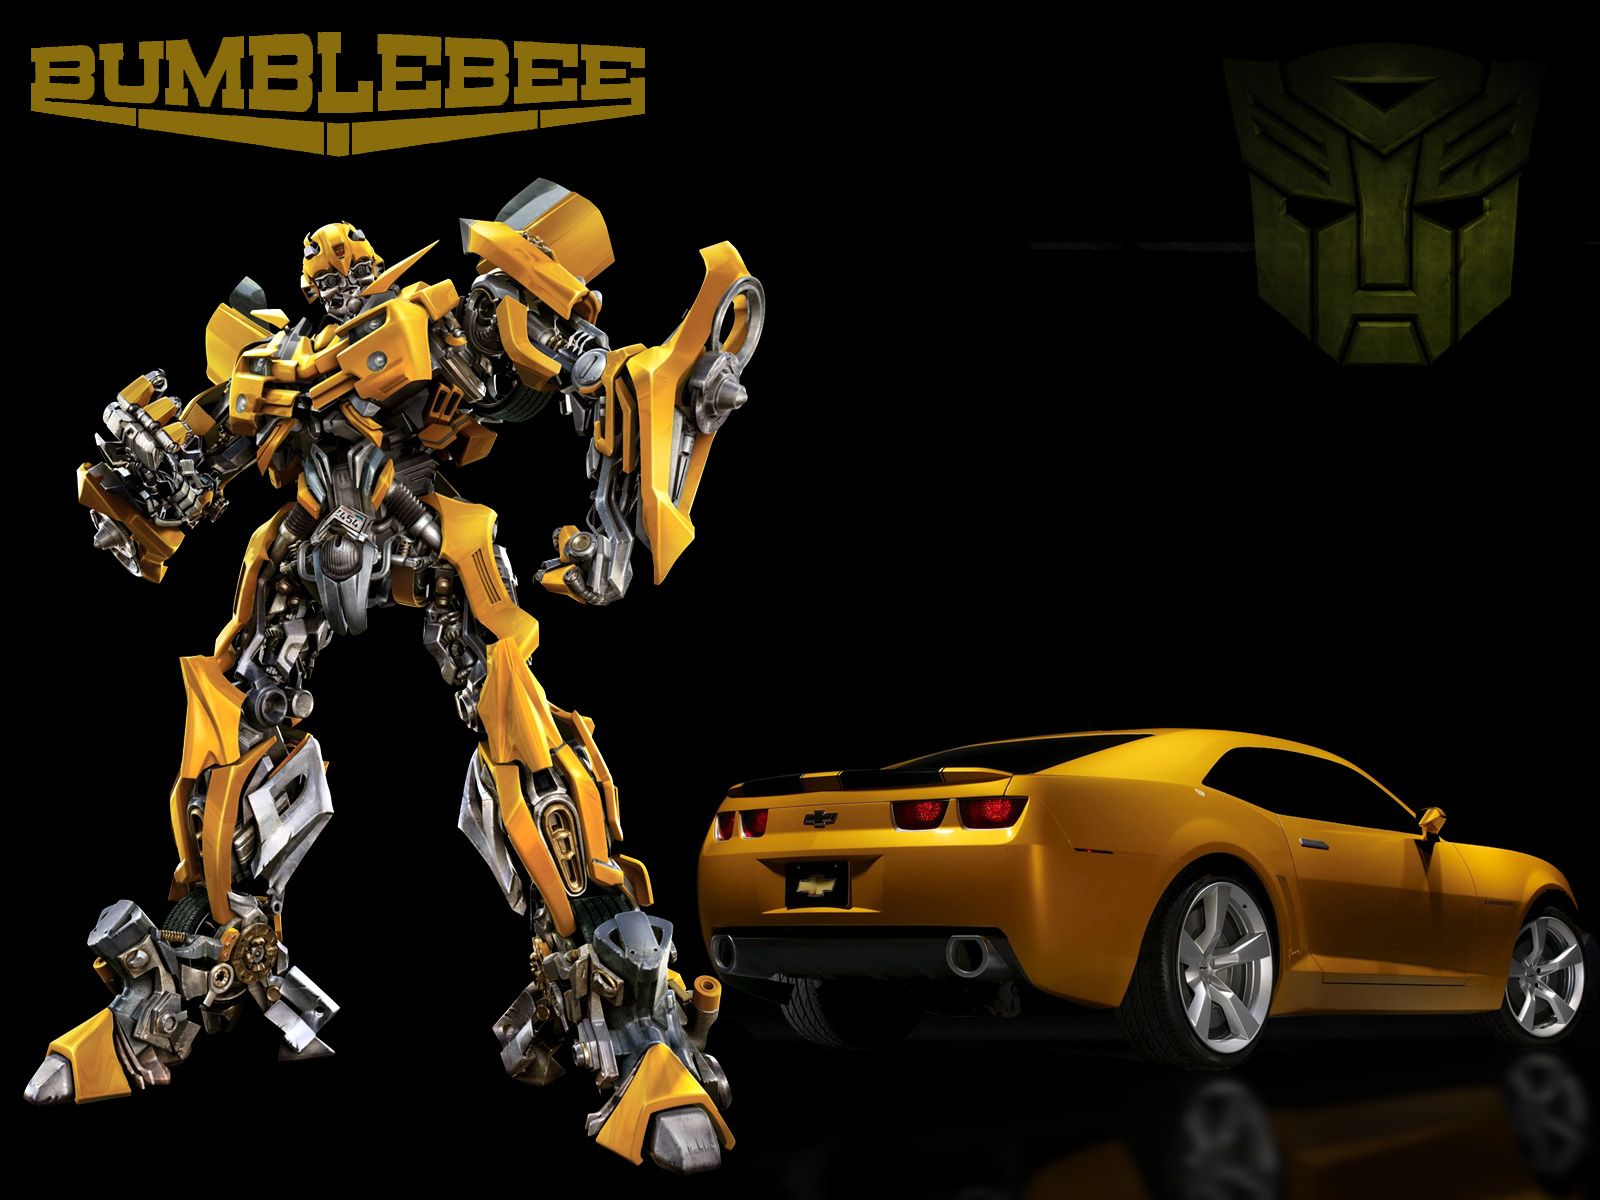 Bumble Bee Wallpaper Picture - Wallpapers Place